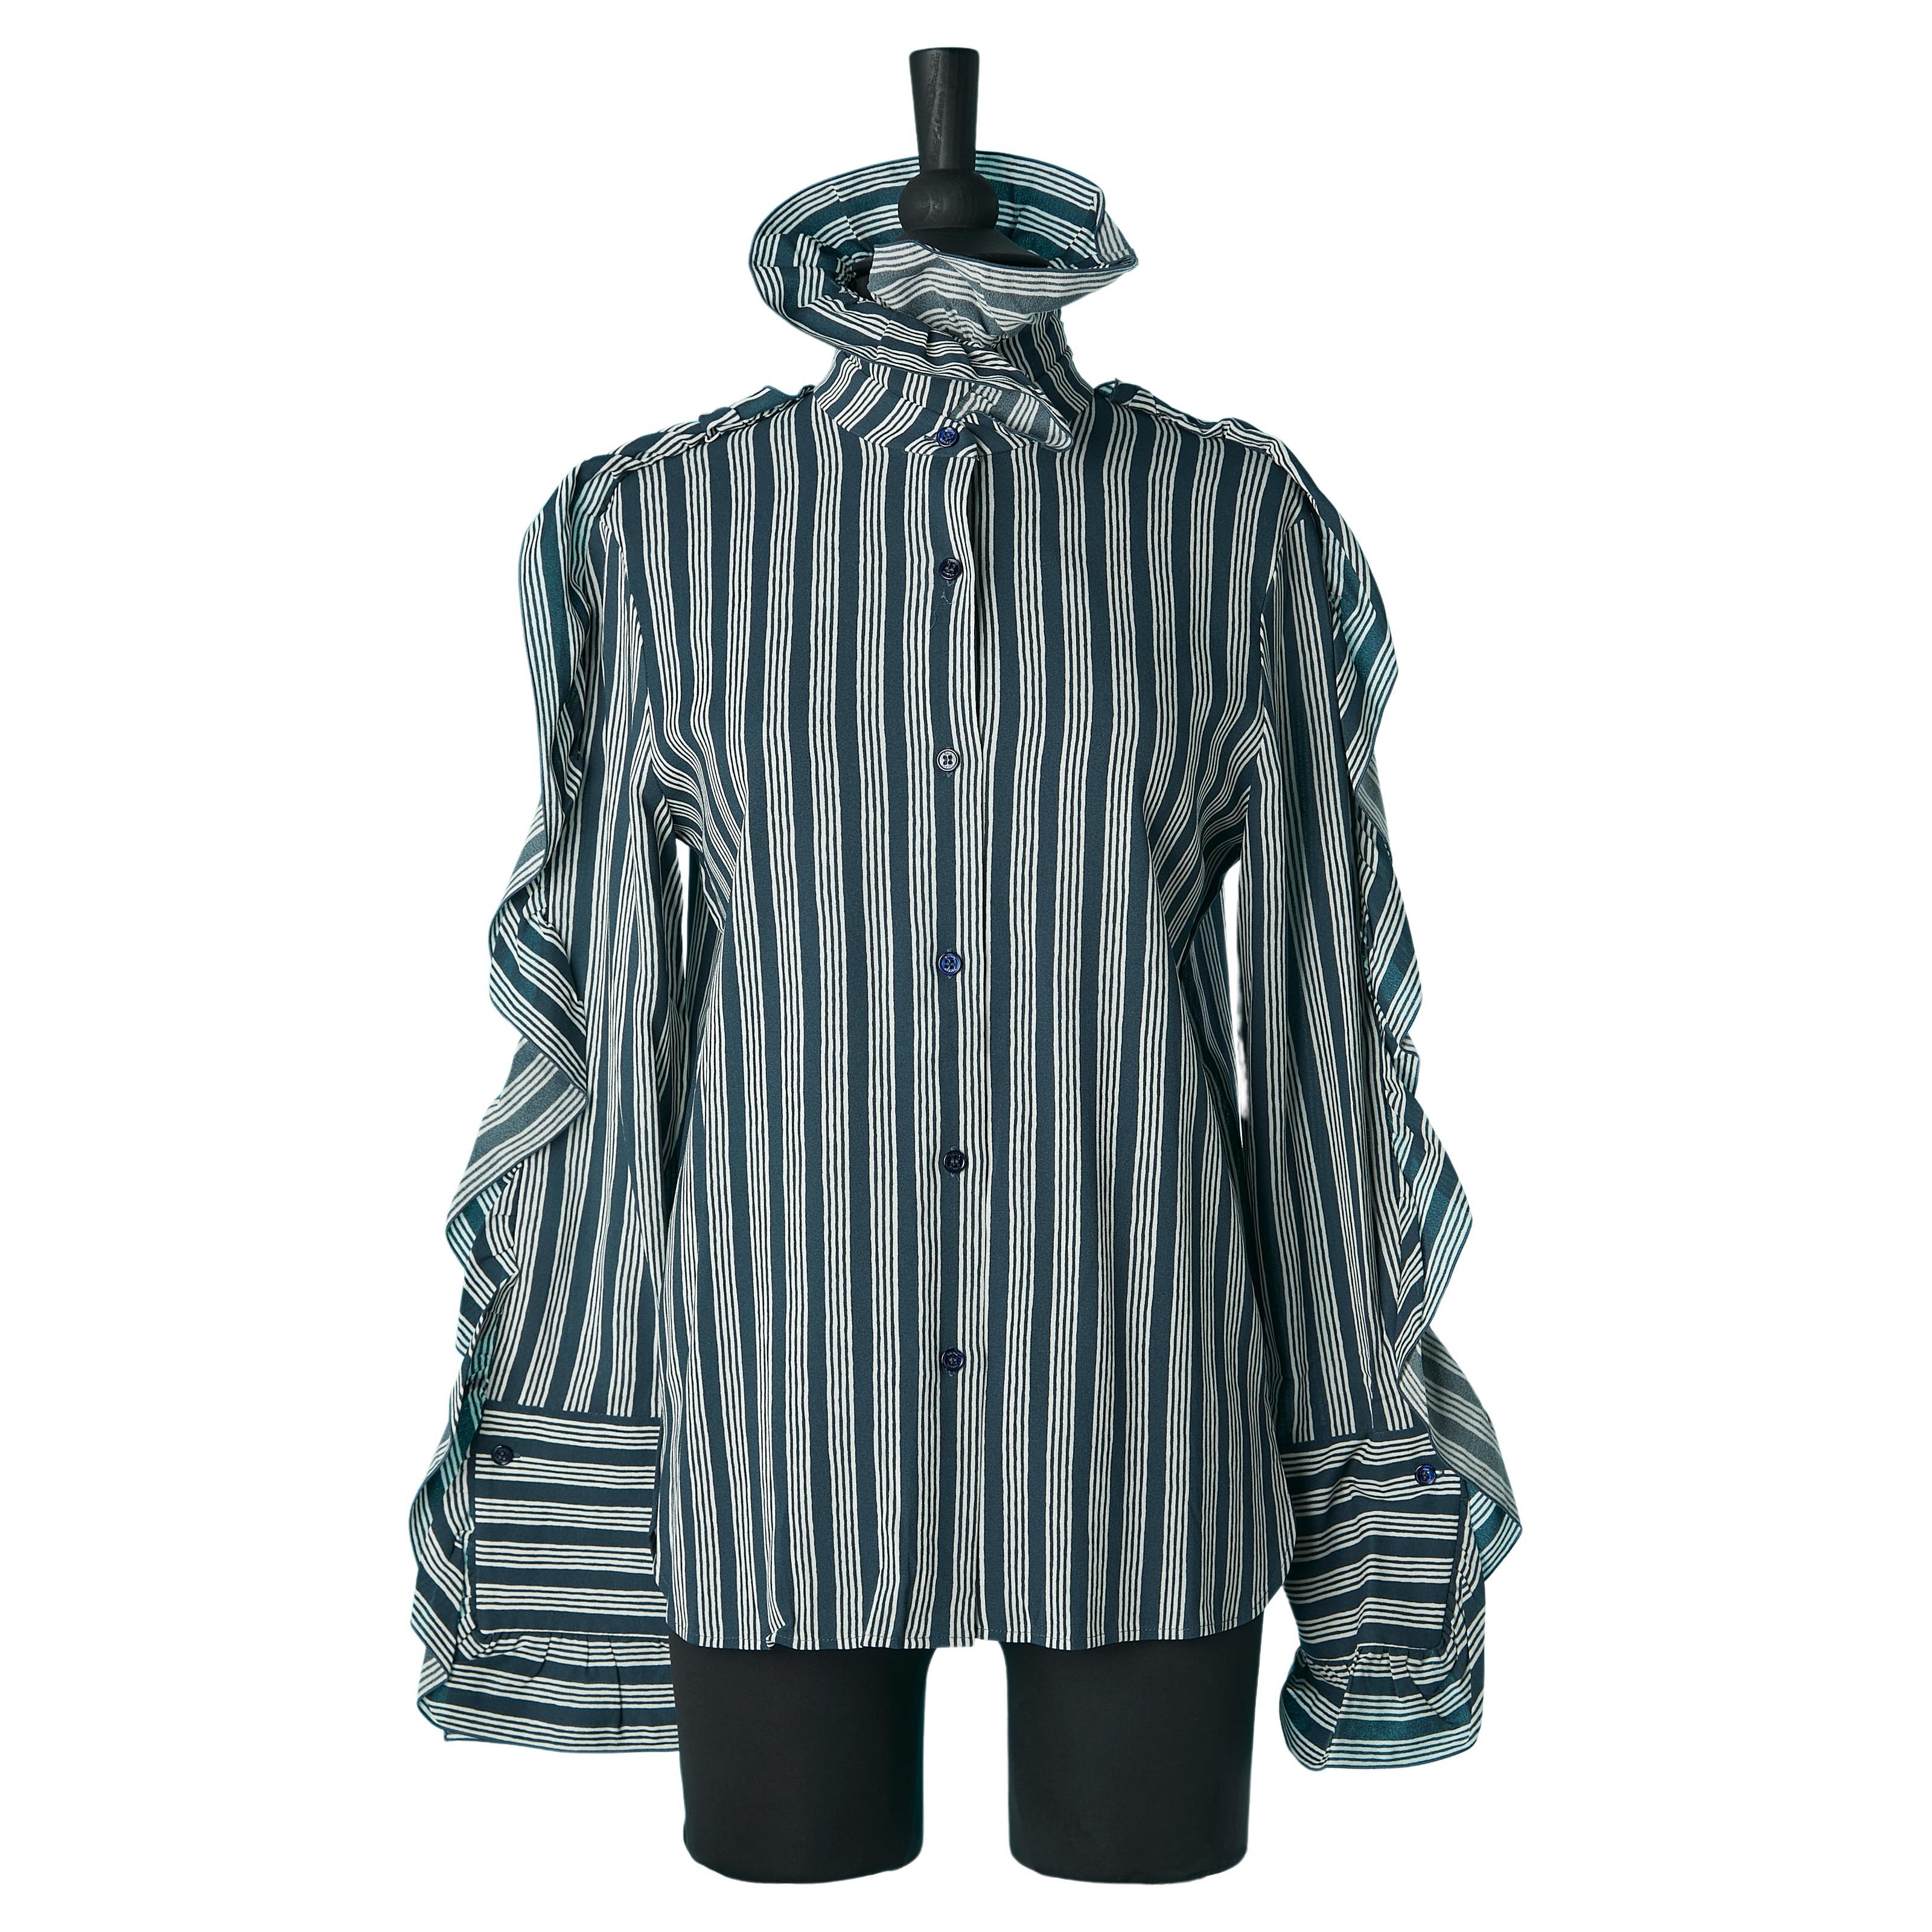 Striped shirt with ruffles on the collar and on the sleeves Sonia Rykiel 